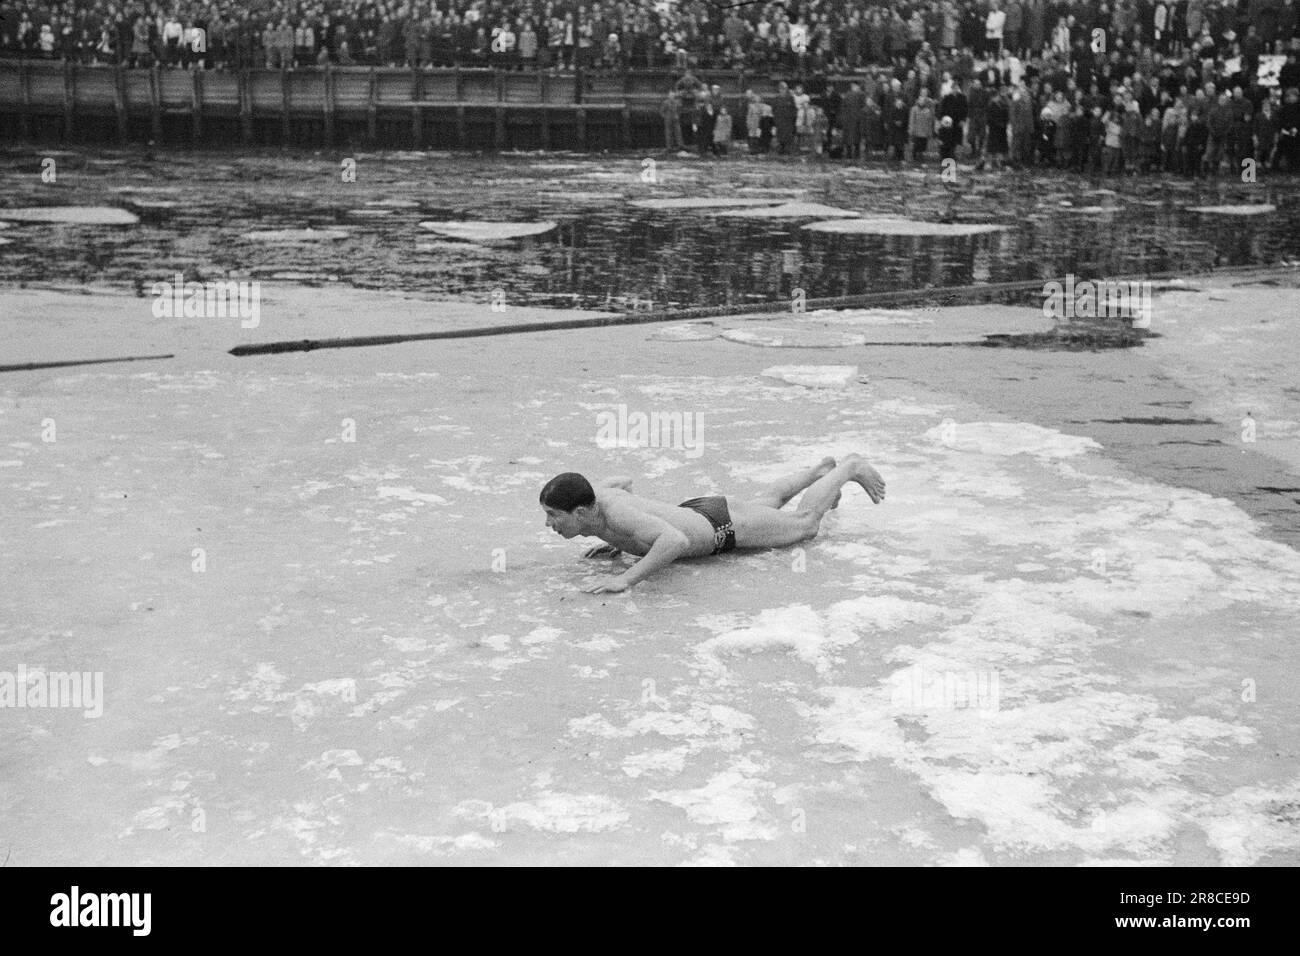 Current 3-1947: Bathing between ice fishingBathing life between ice floes. The association 'Isbitarna' from Gothenburg has regular swimming days throughout the winter. Following an invitation from Idrettslaget Varg and Arbeiderbladet, they visited Oslo the other day, and showed how lifesaving should be handled in winter.  Should you be unlucky enough to fall into the water on a winter's day, you should preferably make sure you have a couple of ice spikes on you. You will get very good use for them to haul you up onto the ice with, as it is as smooth as green soap. It is inadvisable to get a go Stock Photo